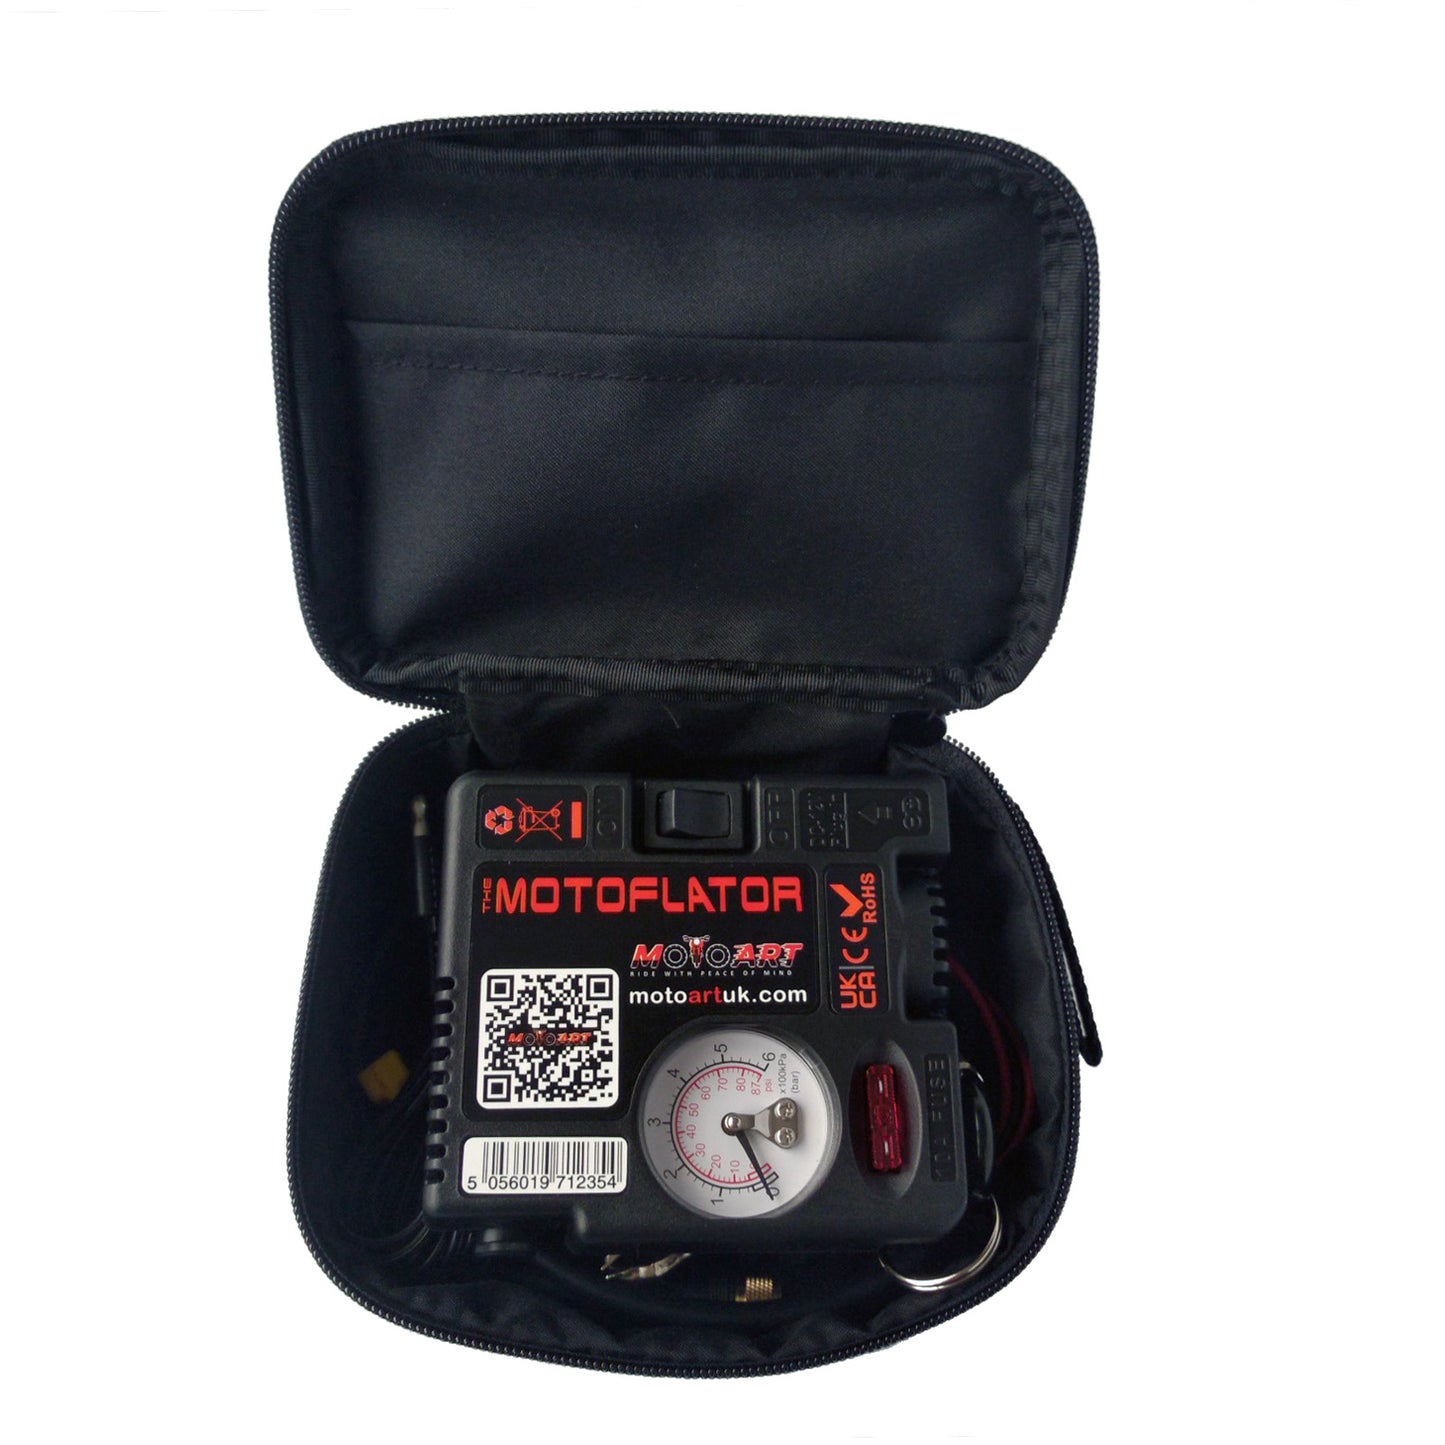 The Motoflator and accessories shown in a black nylon zipper bag with internal pocket and carry handle